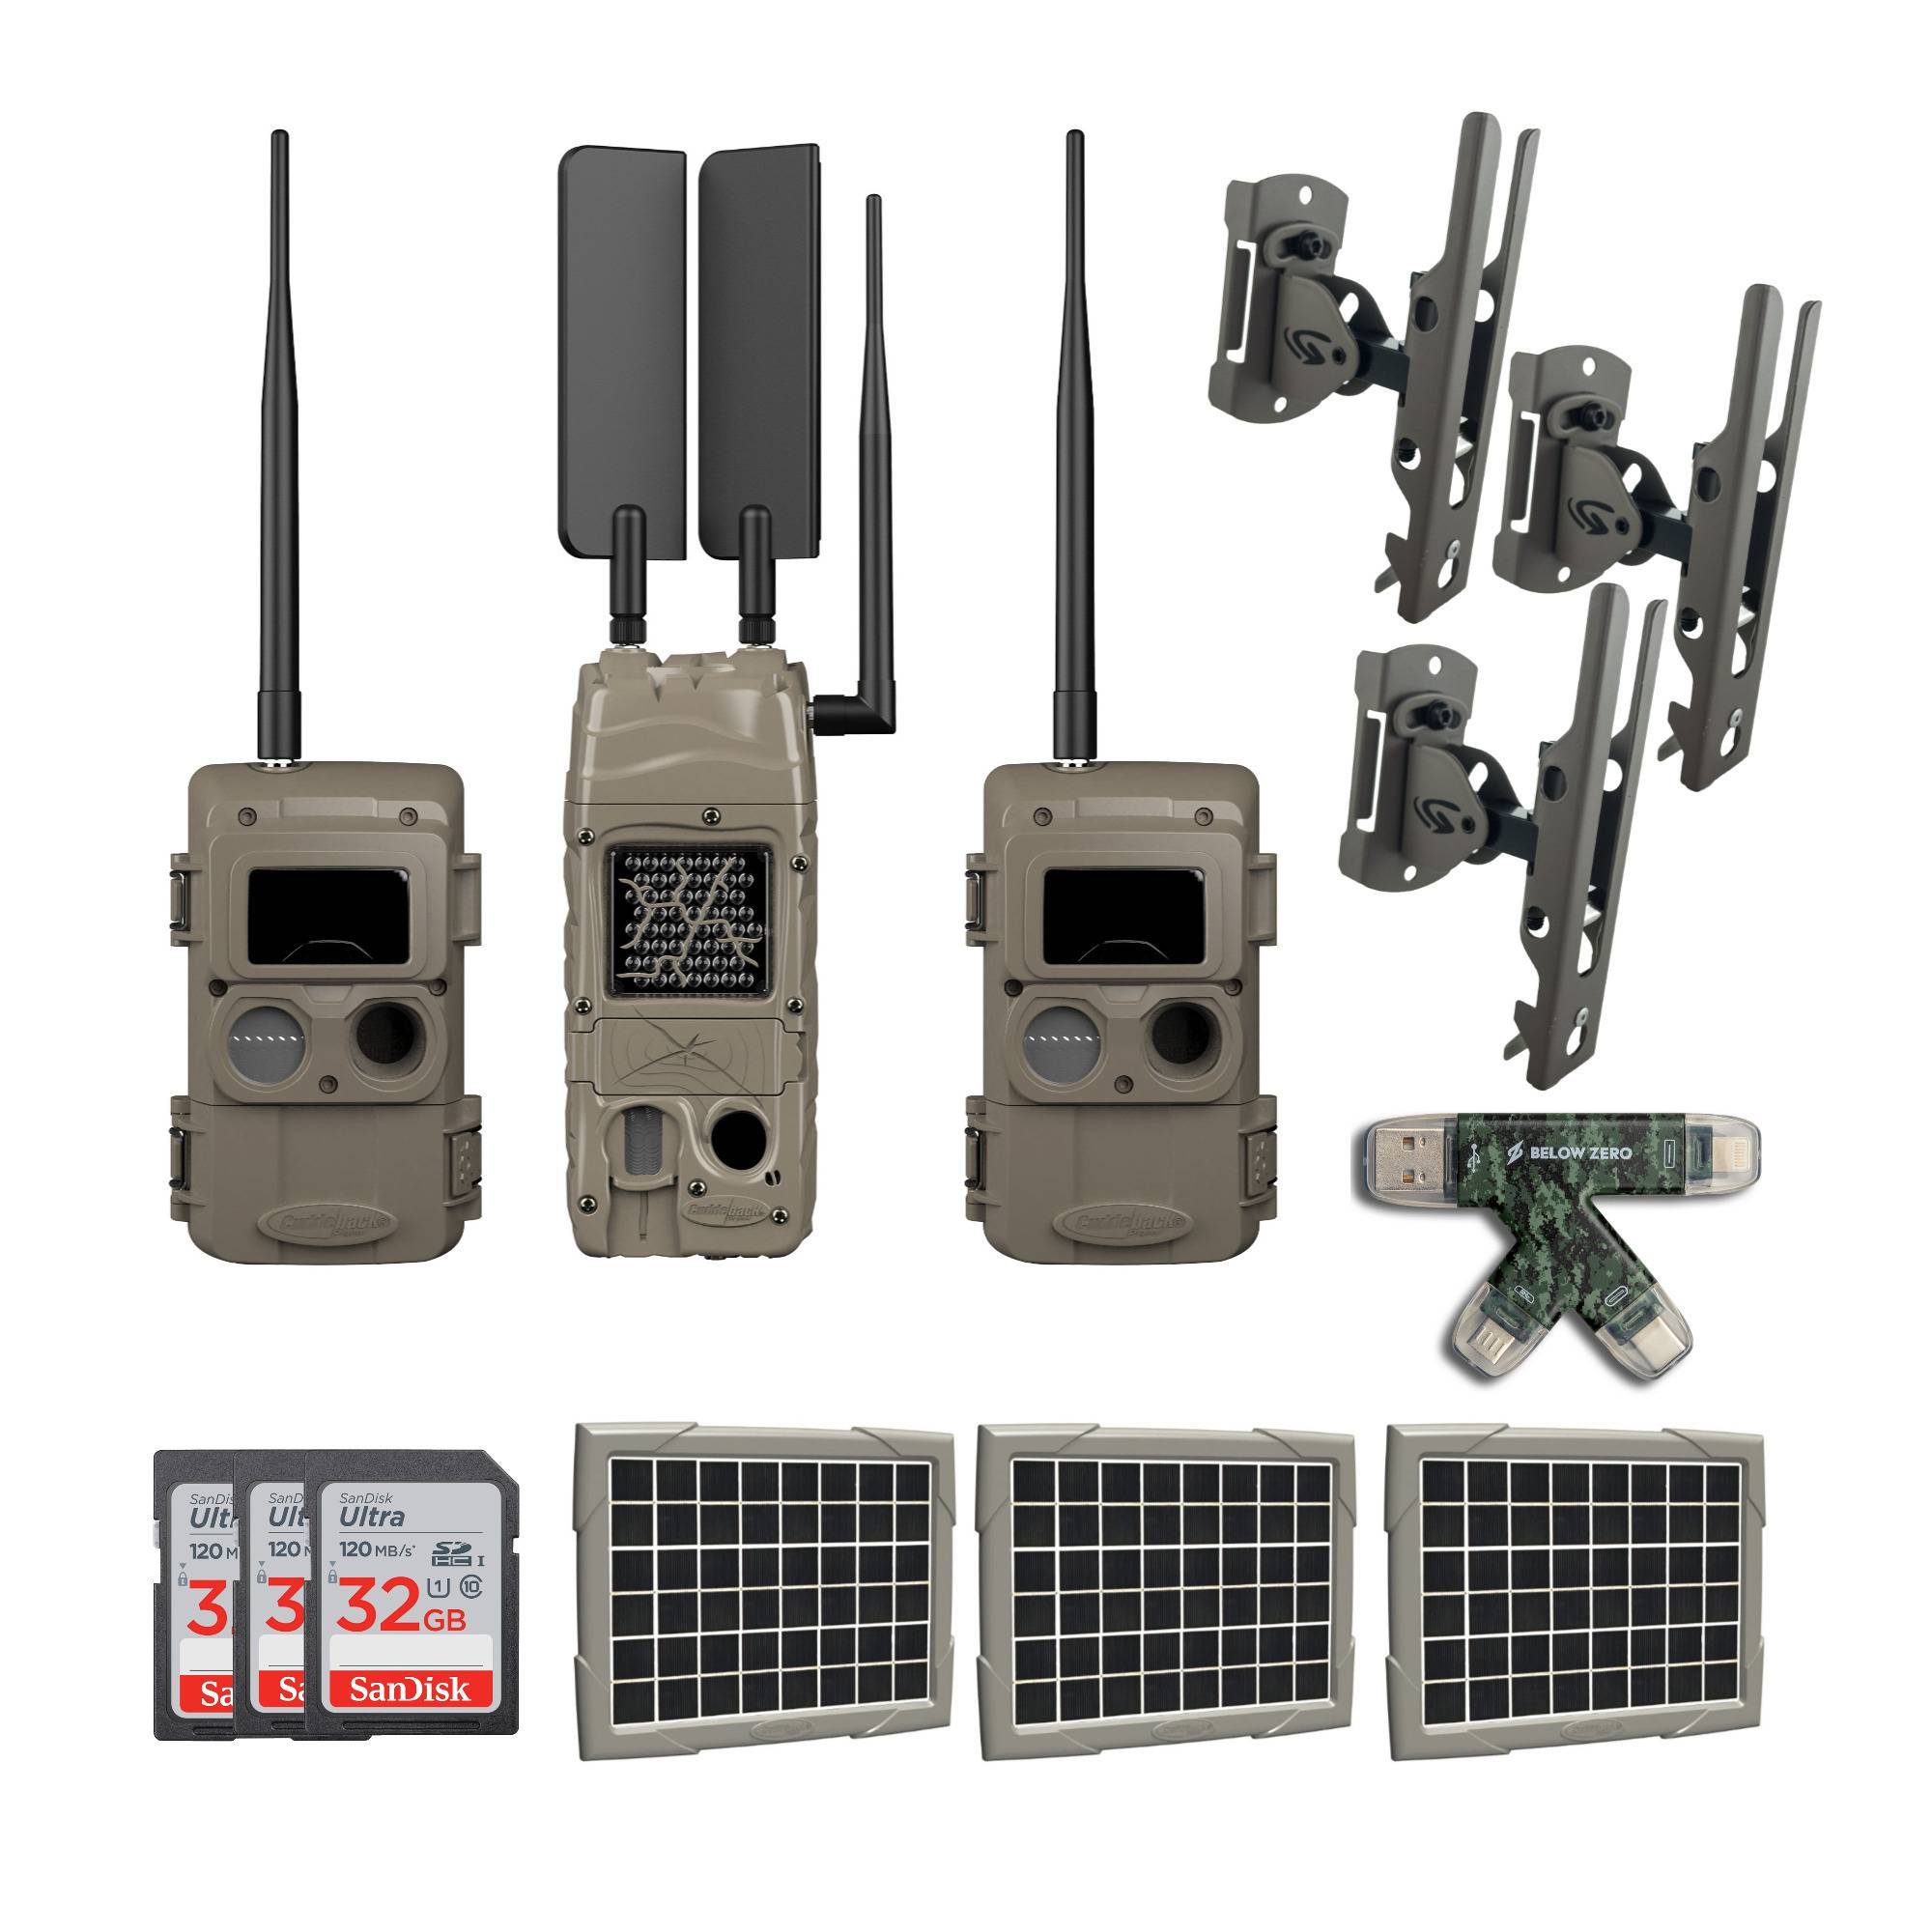 Cuddeback CuddeLink Cell Trail Camera AT&T with Super Solar Power Bank Bundle (3-Pack)